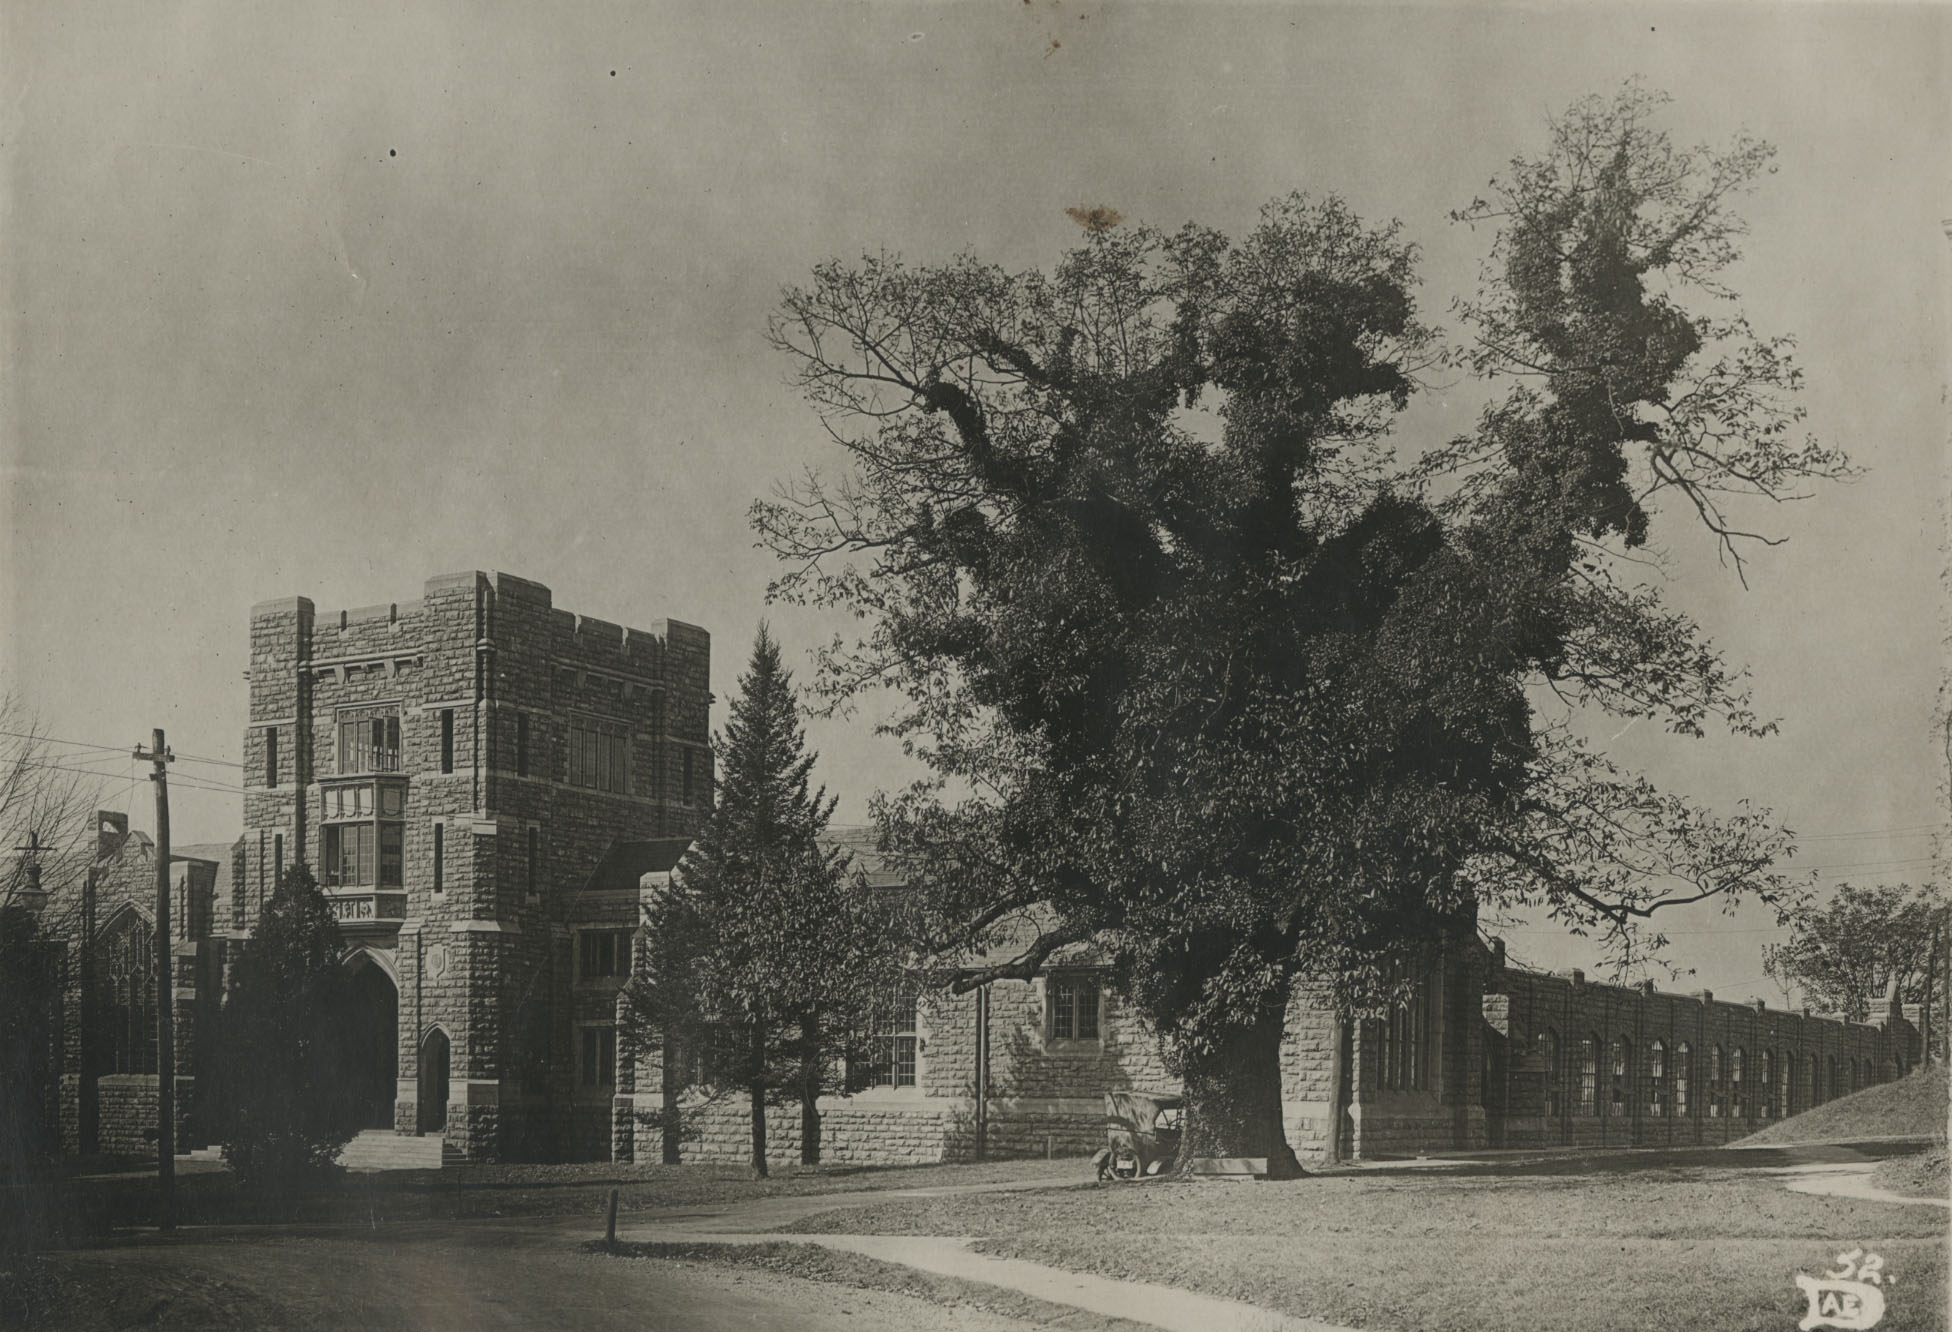 Within Masseys papers is this photo of an ivy-covered American chestnut in front of old McBryde Hall, ca. 1920. The tree would eventually be killed by the blight that decimated the chestnut population nationwide.